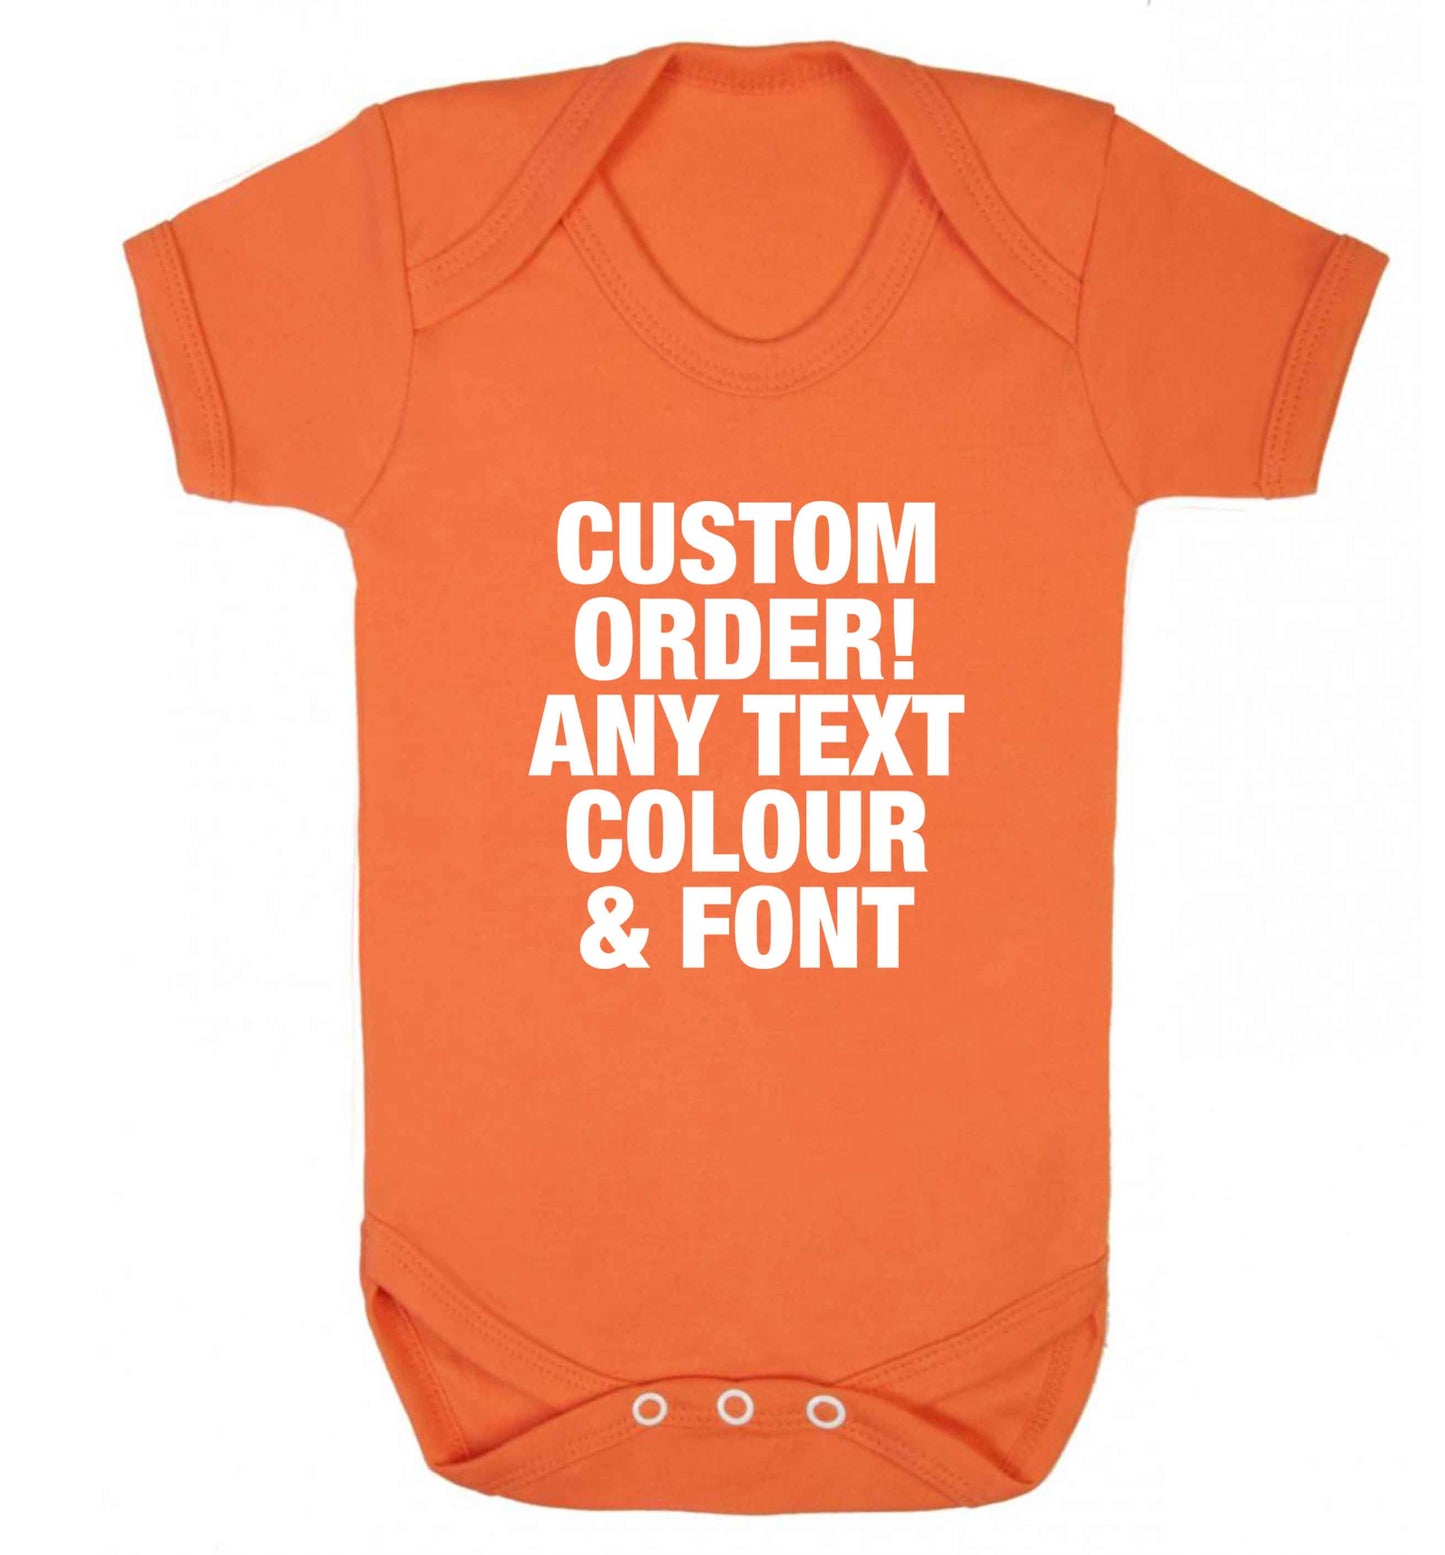 Custom order any text colour and font baby vest orange 18-24 months